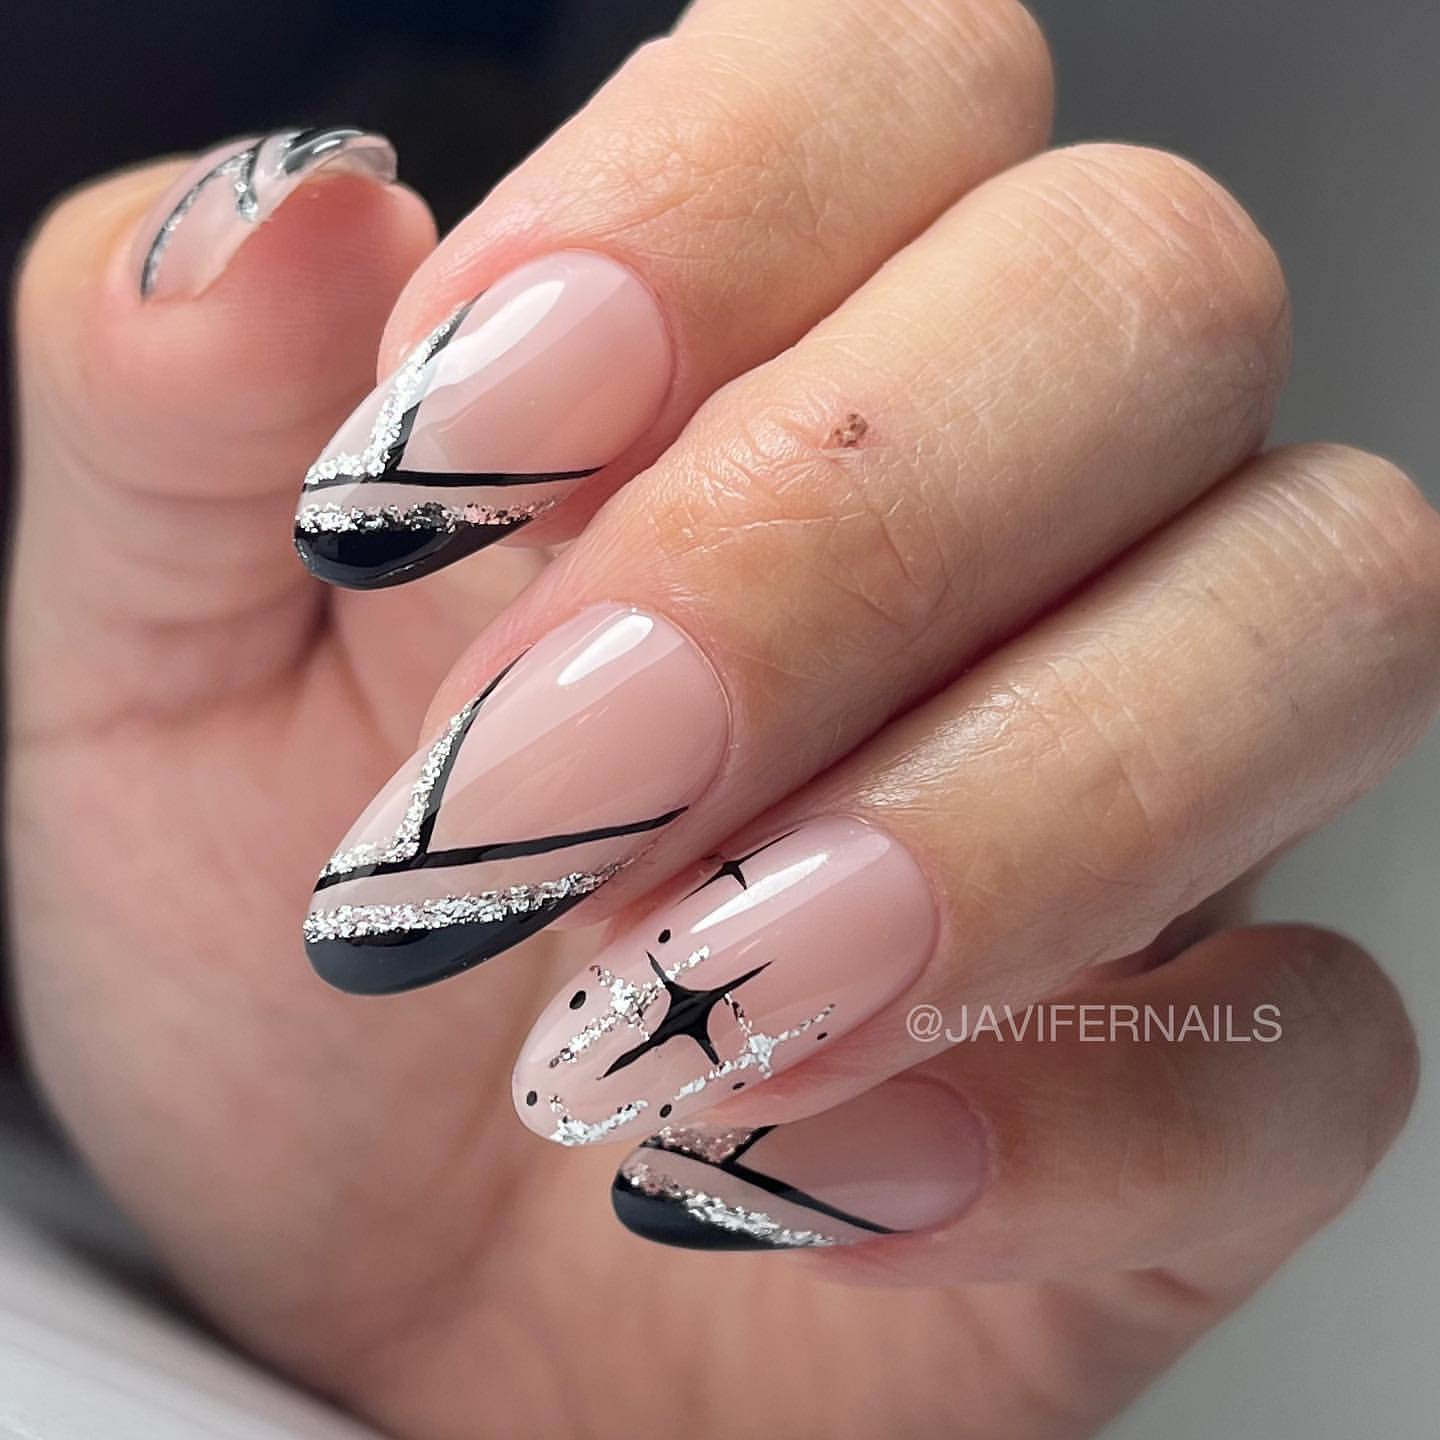 100+ Trendy And Cute Fall Nail Designs To Inspire You This Autumn In 2023 images 15